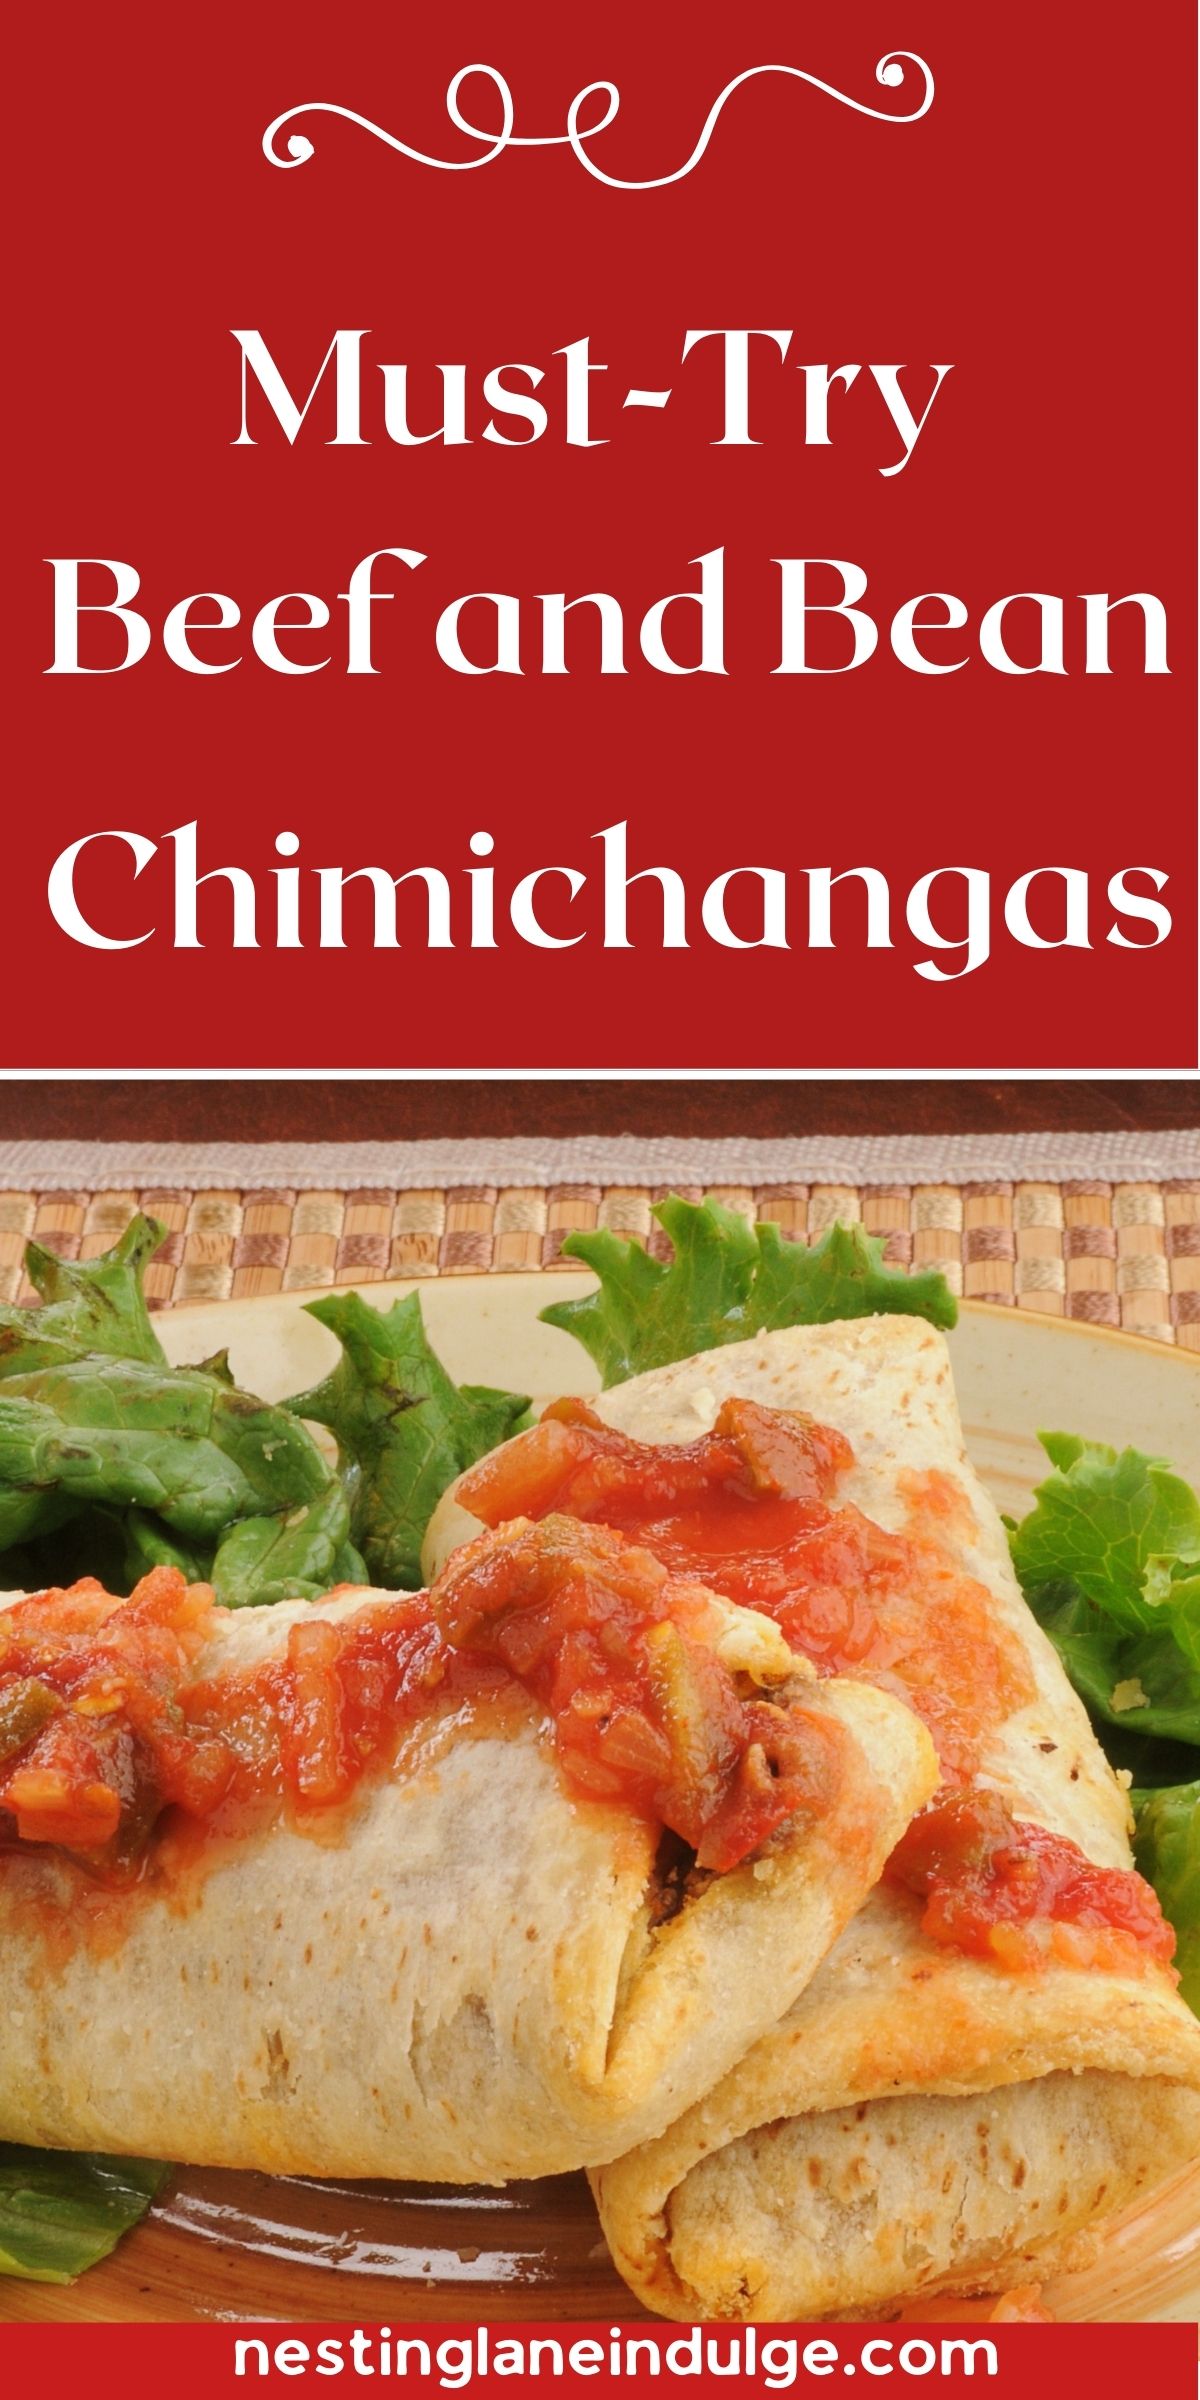 Beef and Bean Chimichangas Graphic.